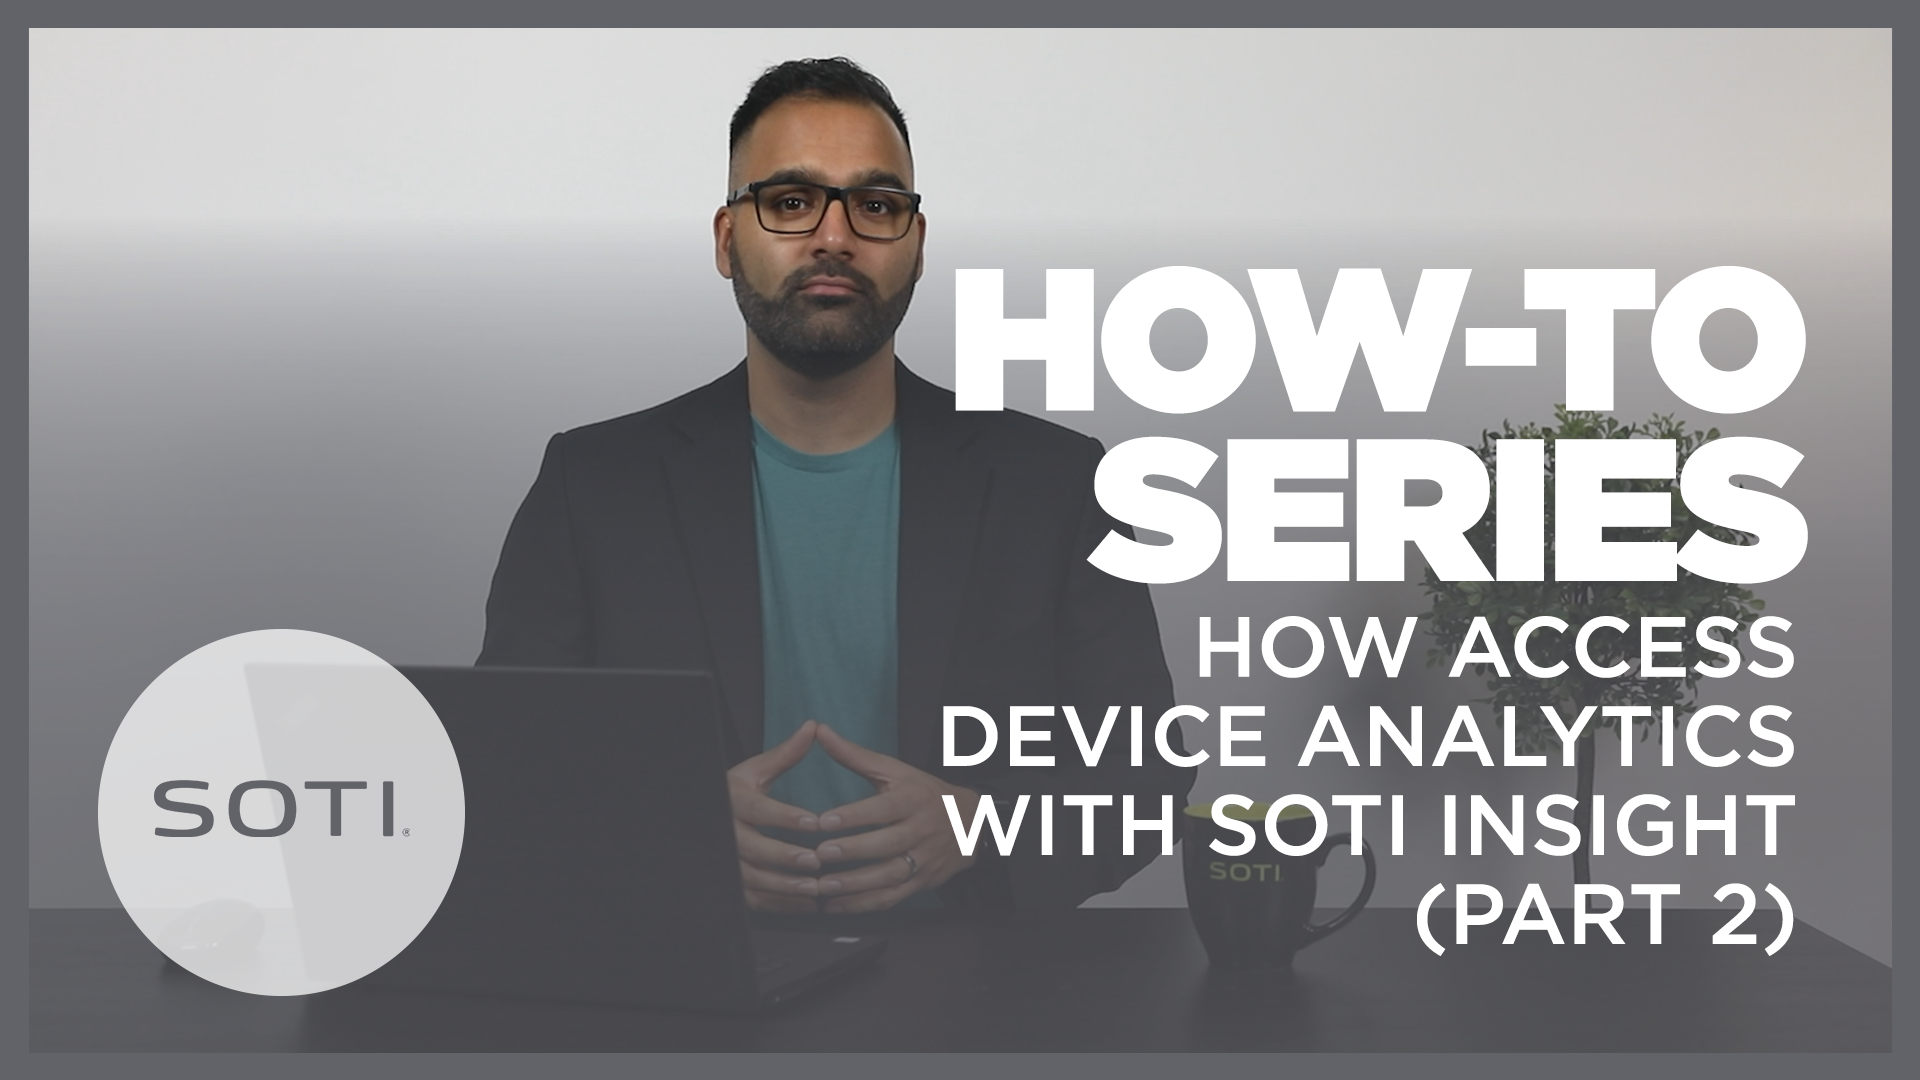 How-To: Access Device Analytics with SOTI Insight (Part 2)